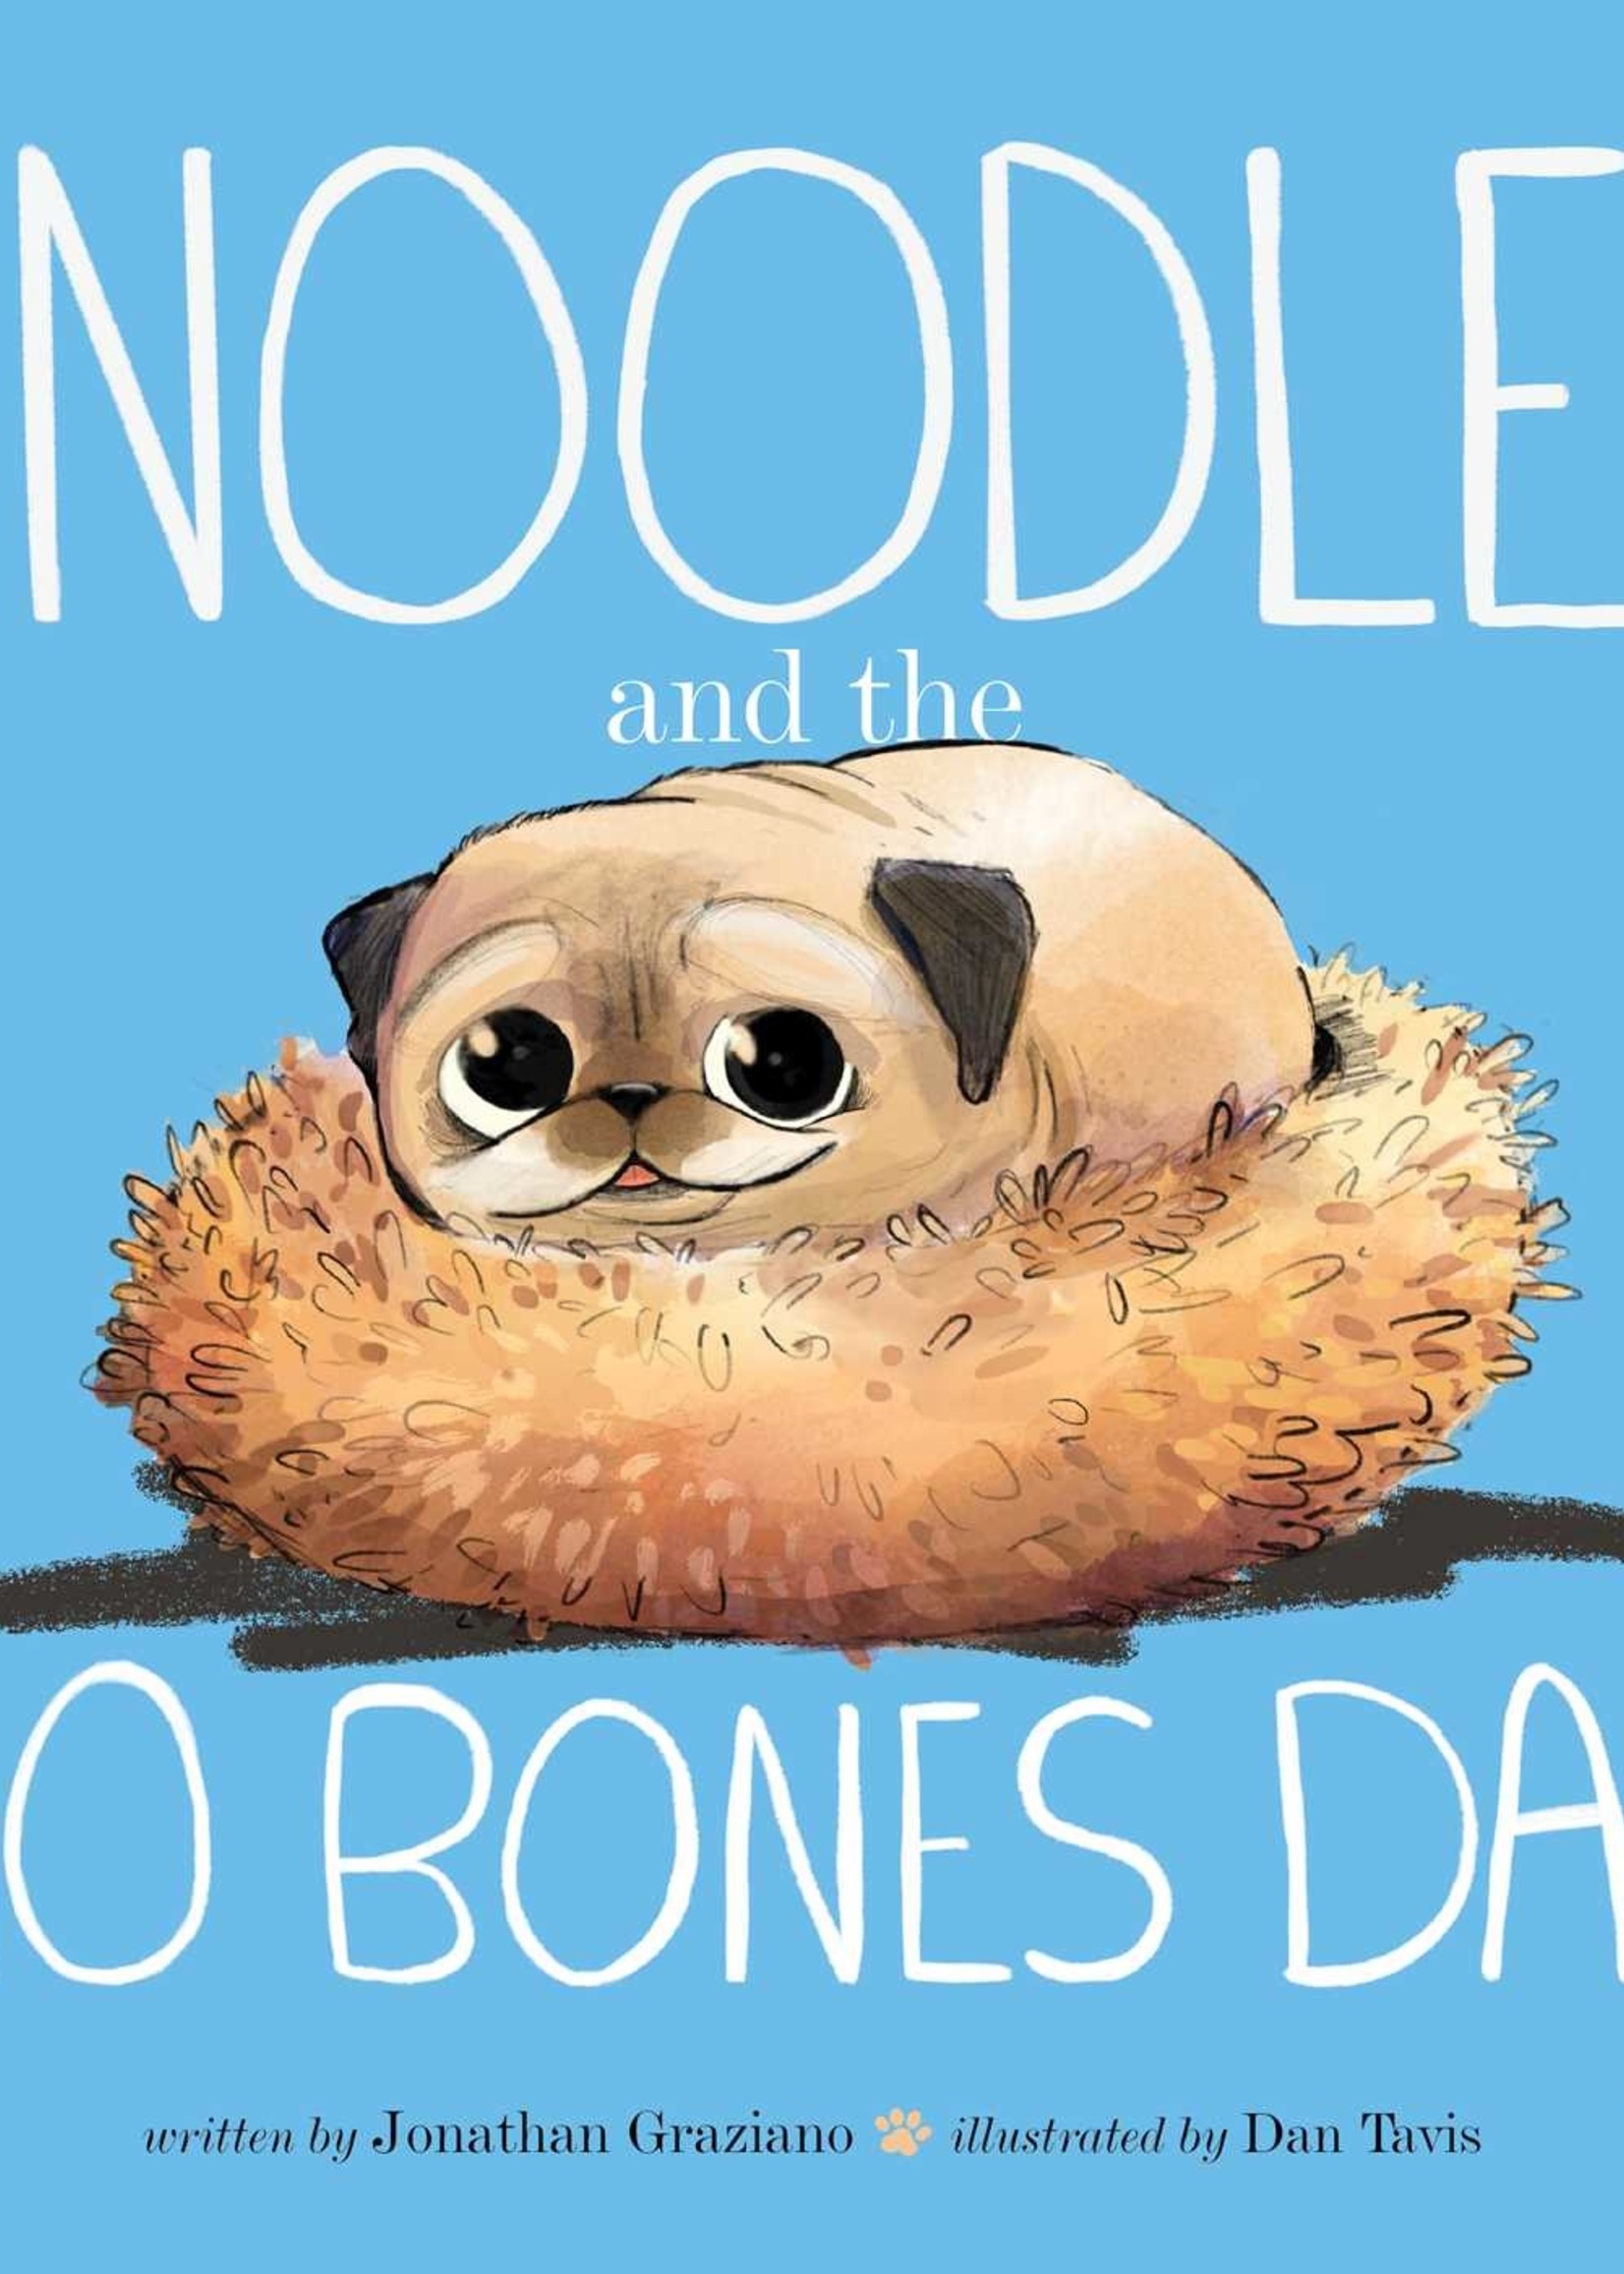 Noodle and the No Bones Day by Jonathan Graziano ,  Dan Tavis  (Illustrations)